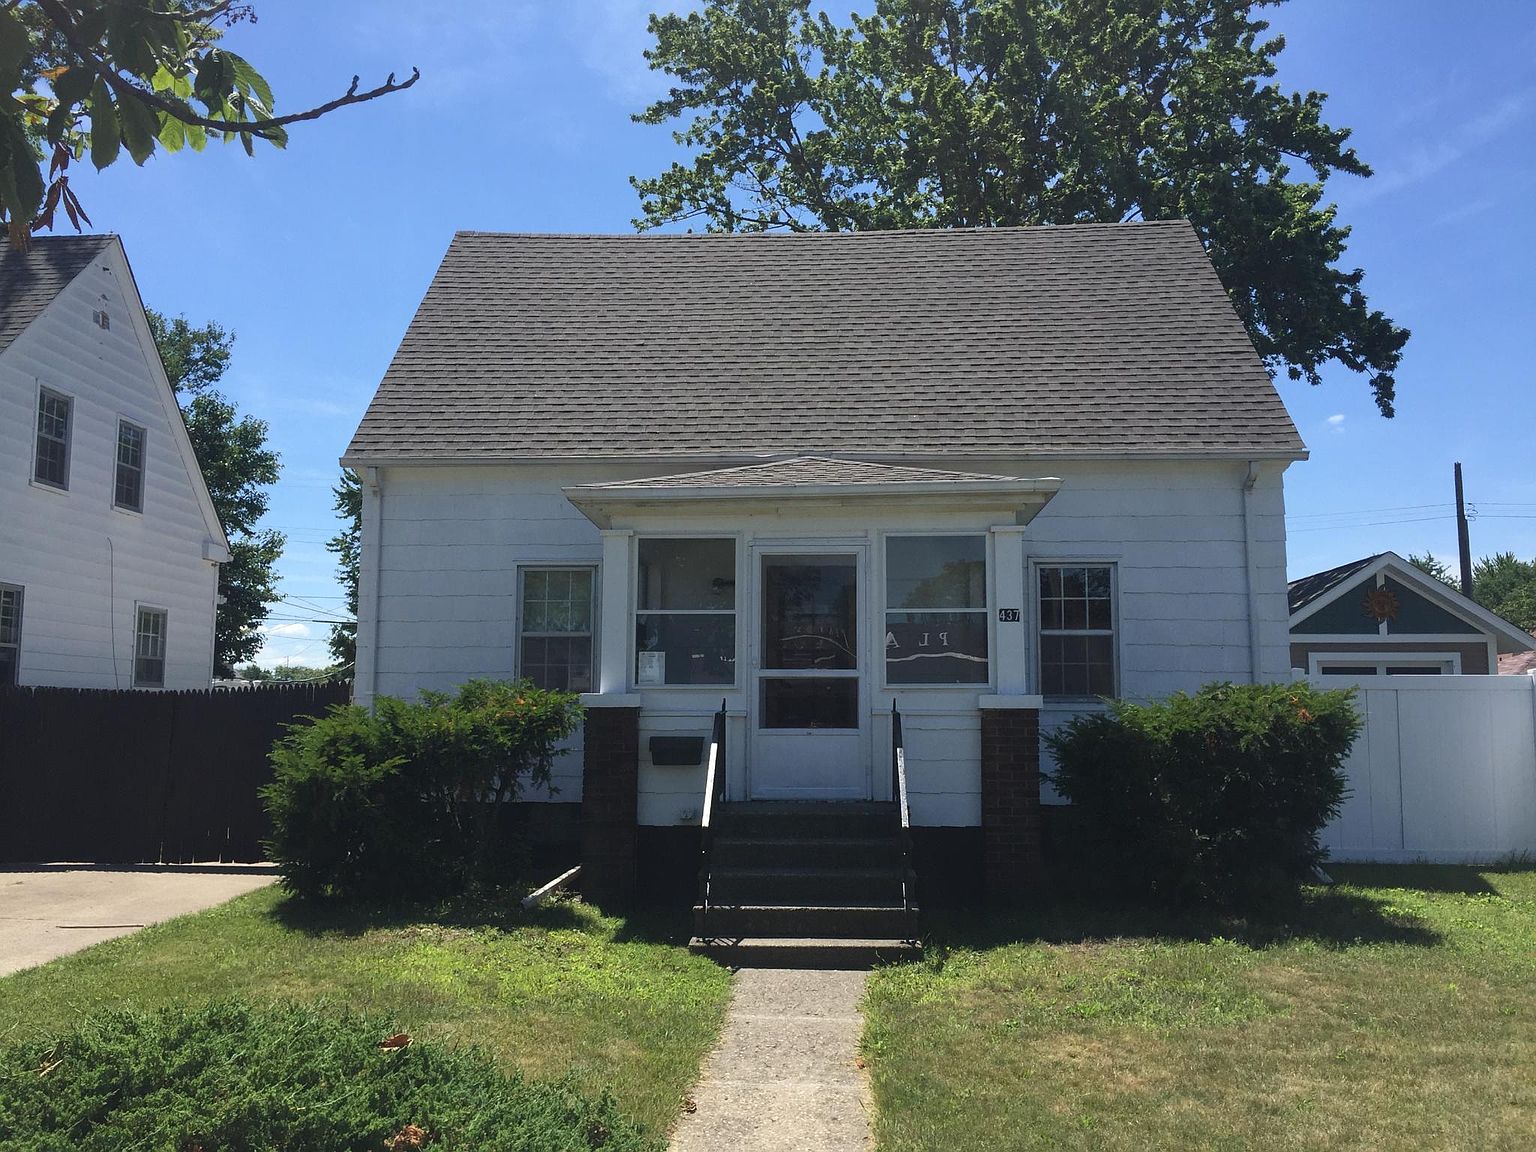 437 Ford Ave, Wyandotte, MI 48192 | Zillow